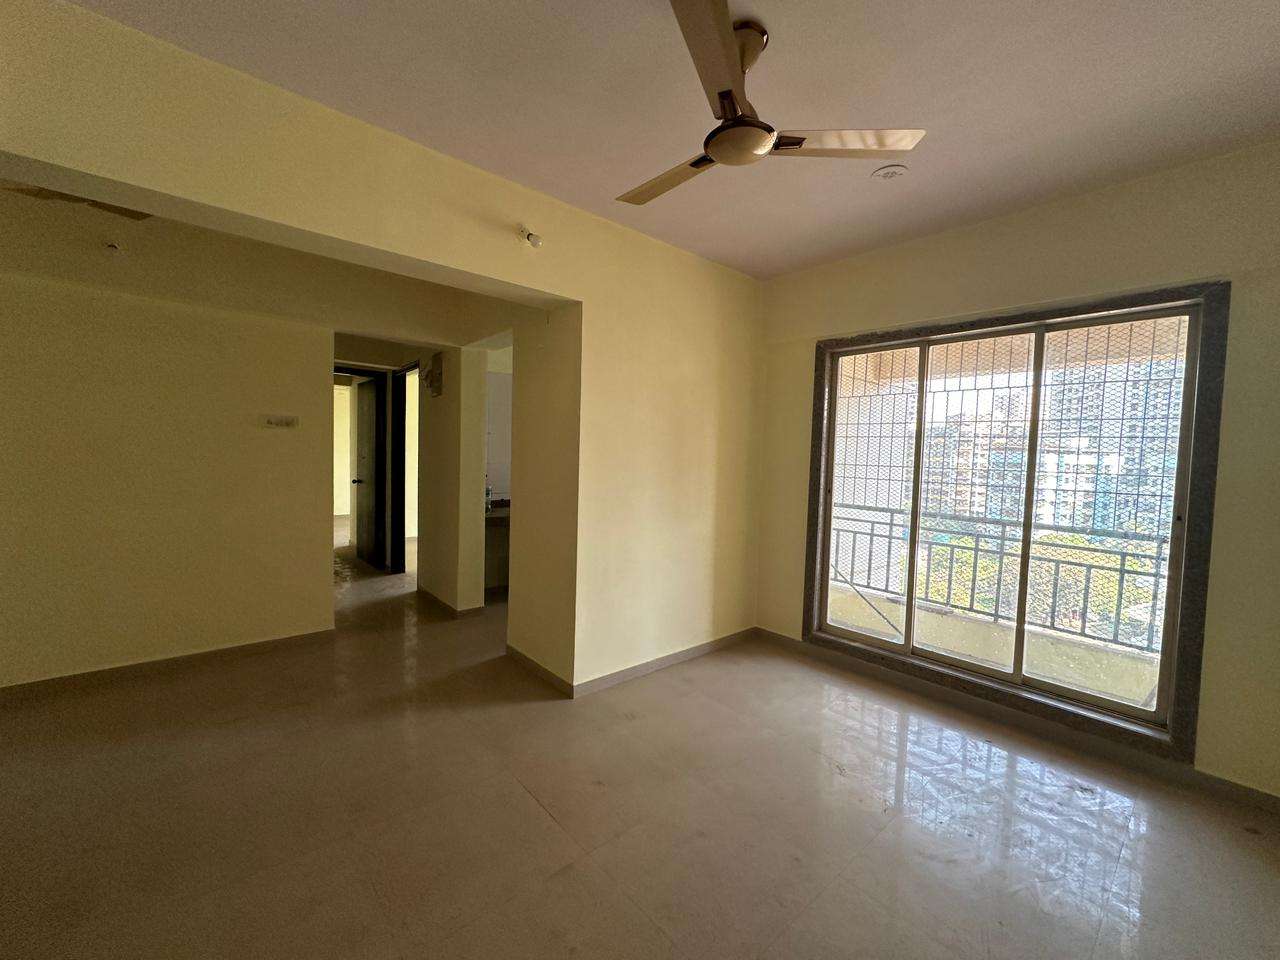 2 BHK Apartment For Rent in Royal Galaxy Kalyan West Thane 6546640